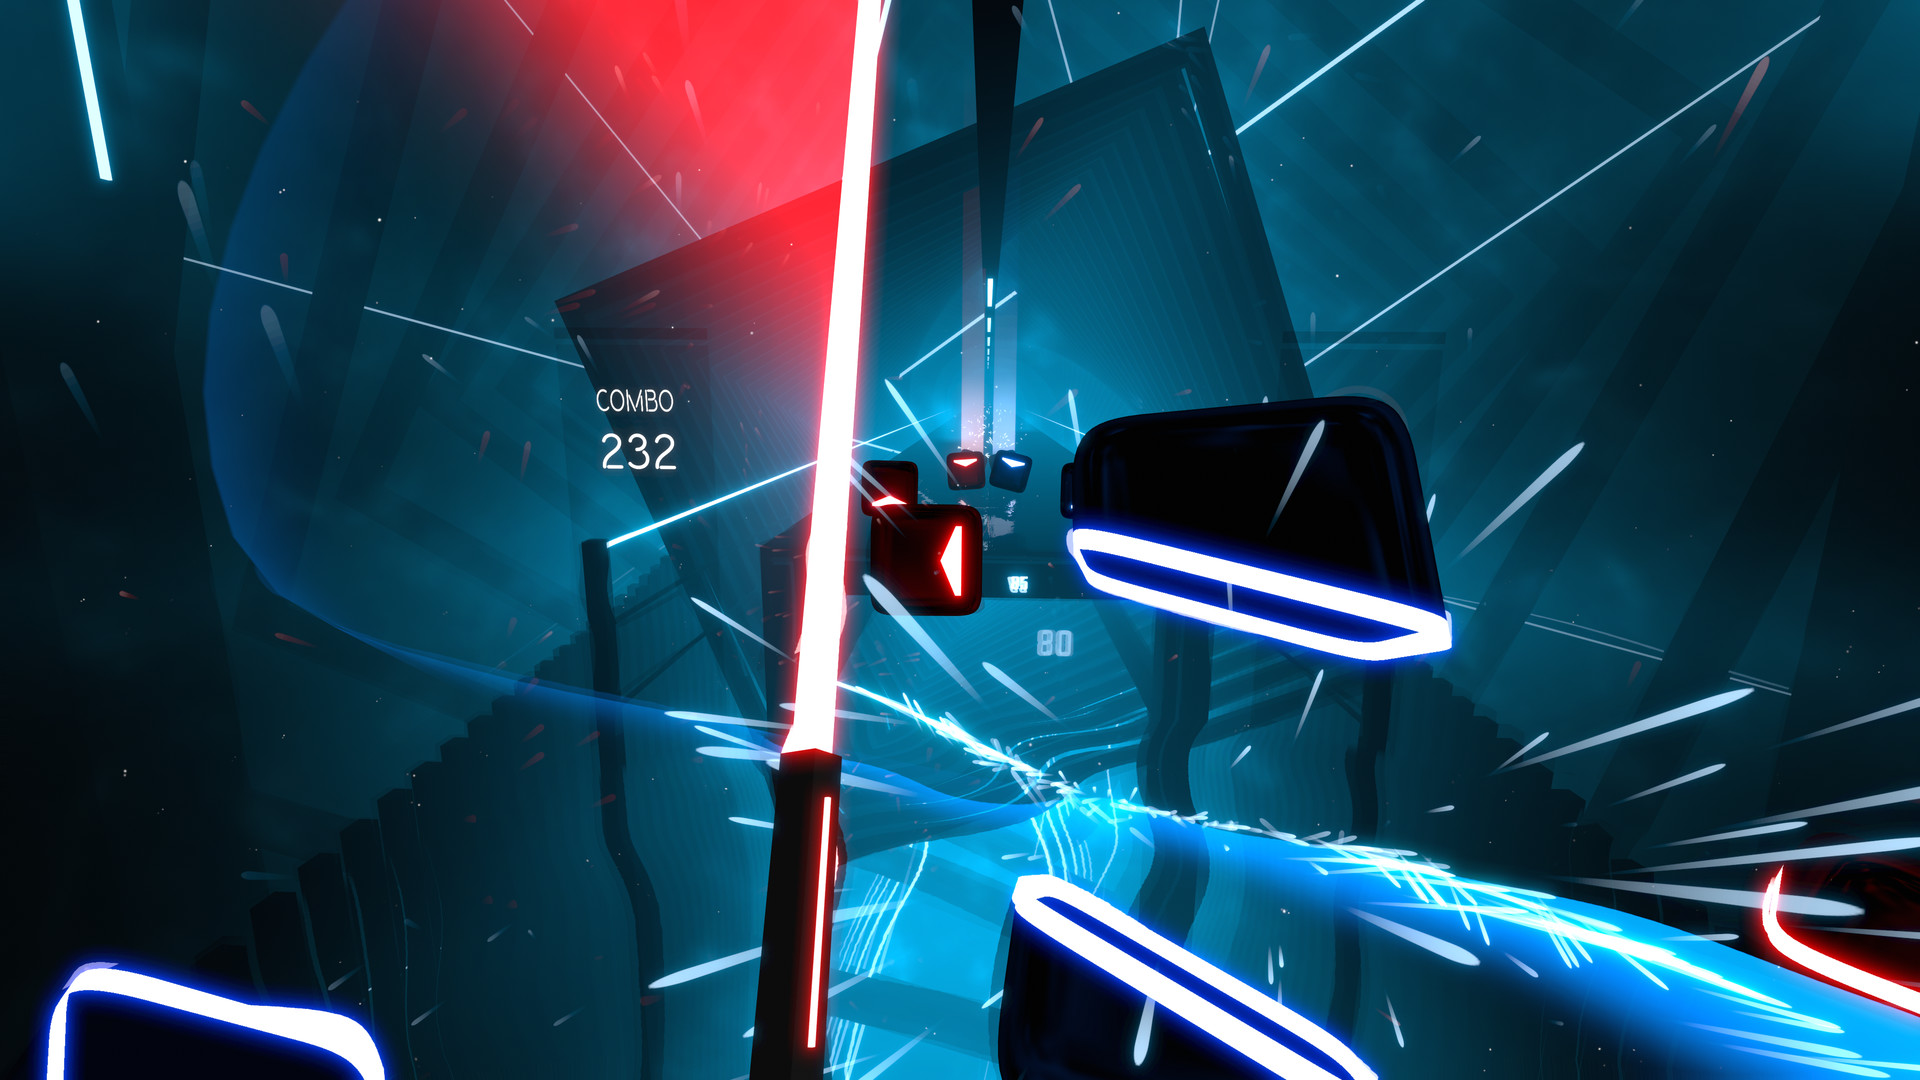 A screenshot from the virtual reality game Beat Saber